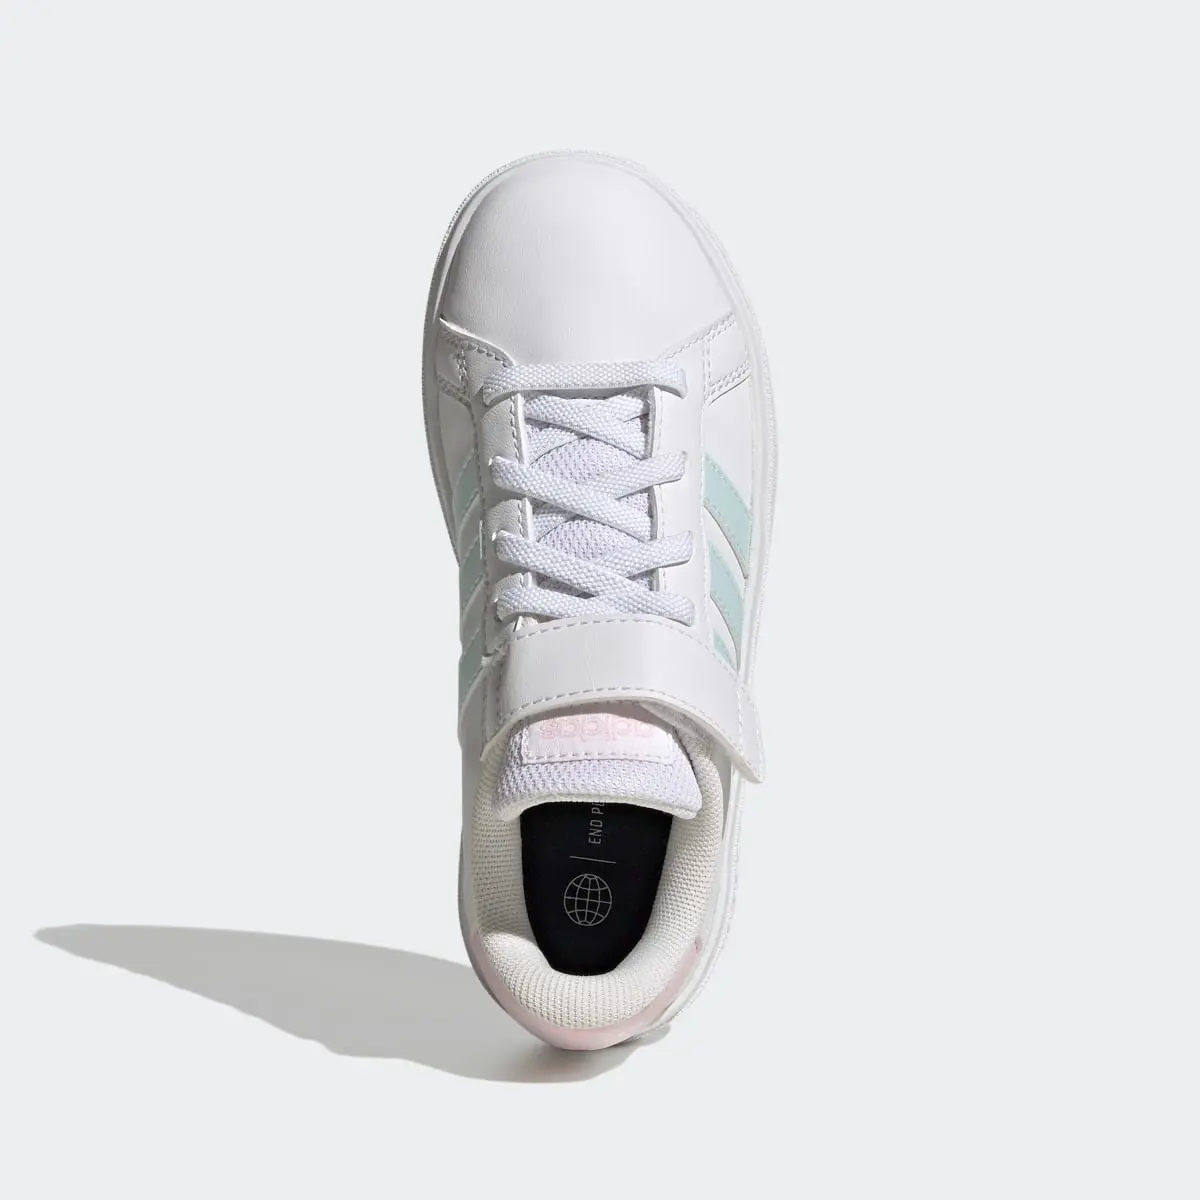 Adidas Grand Court Elastic Lace and Top Strap Shoes. 3